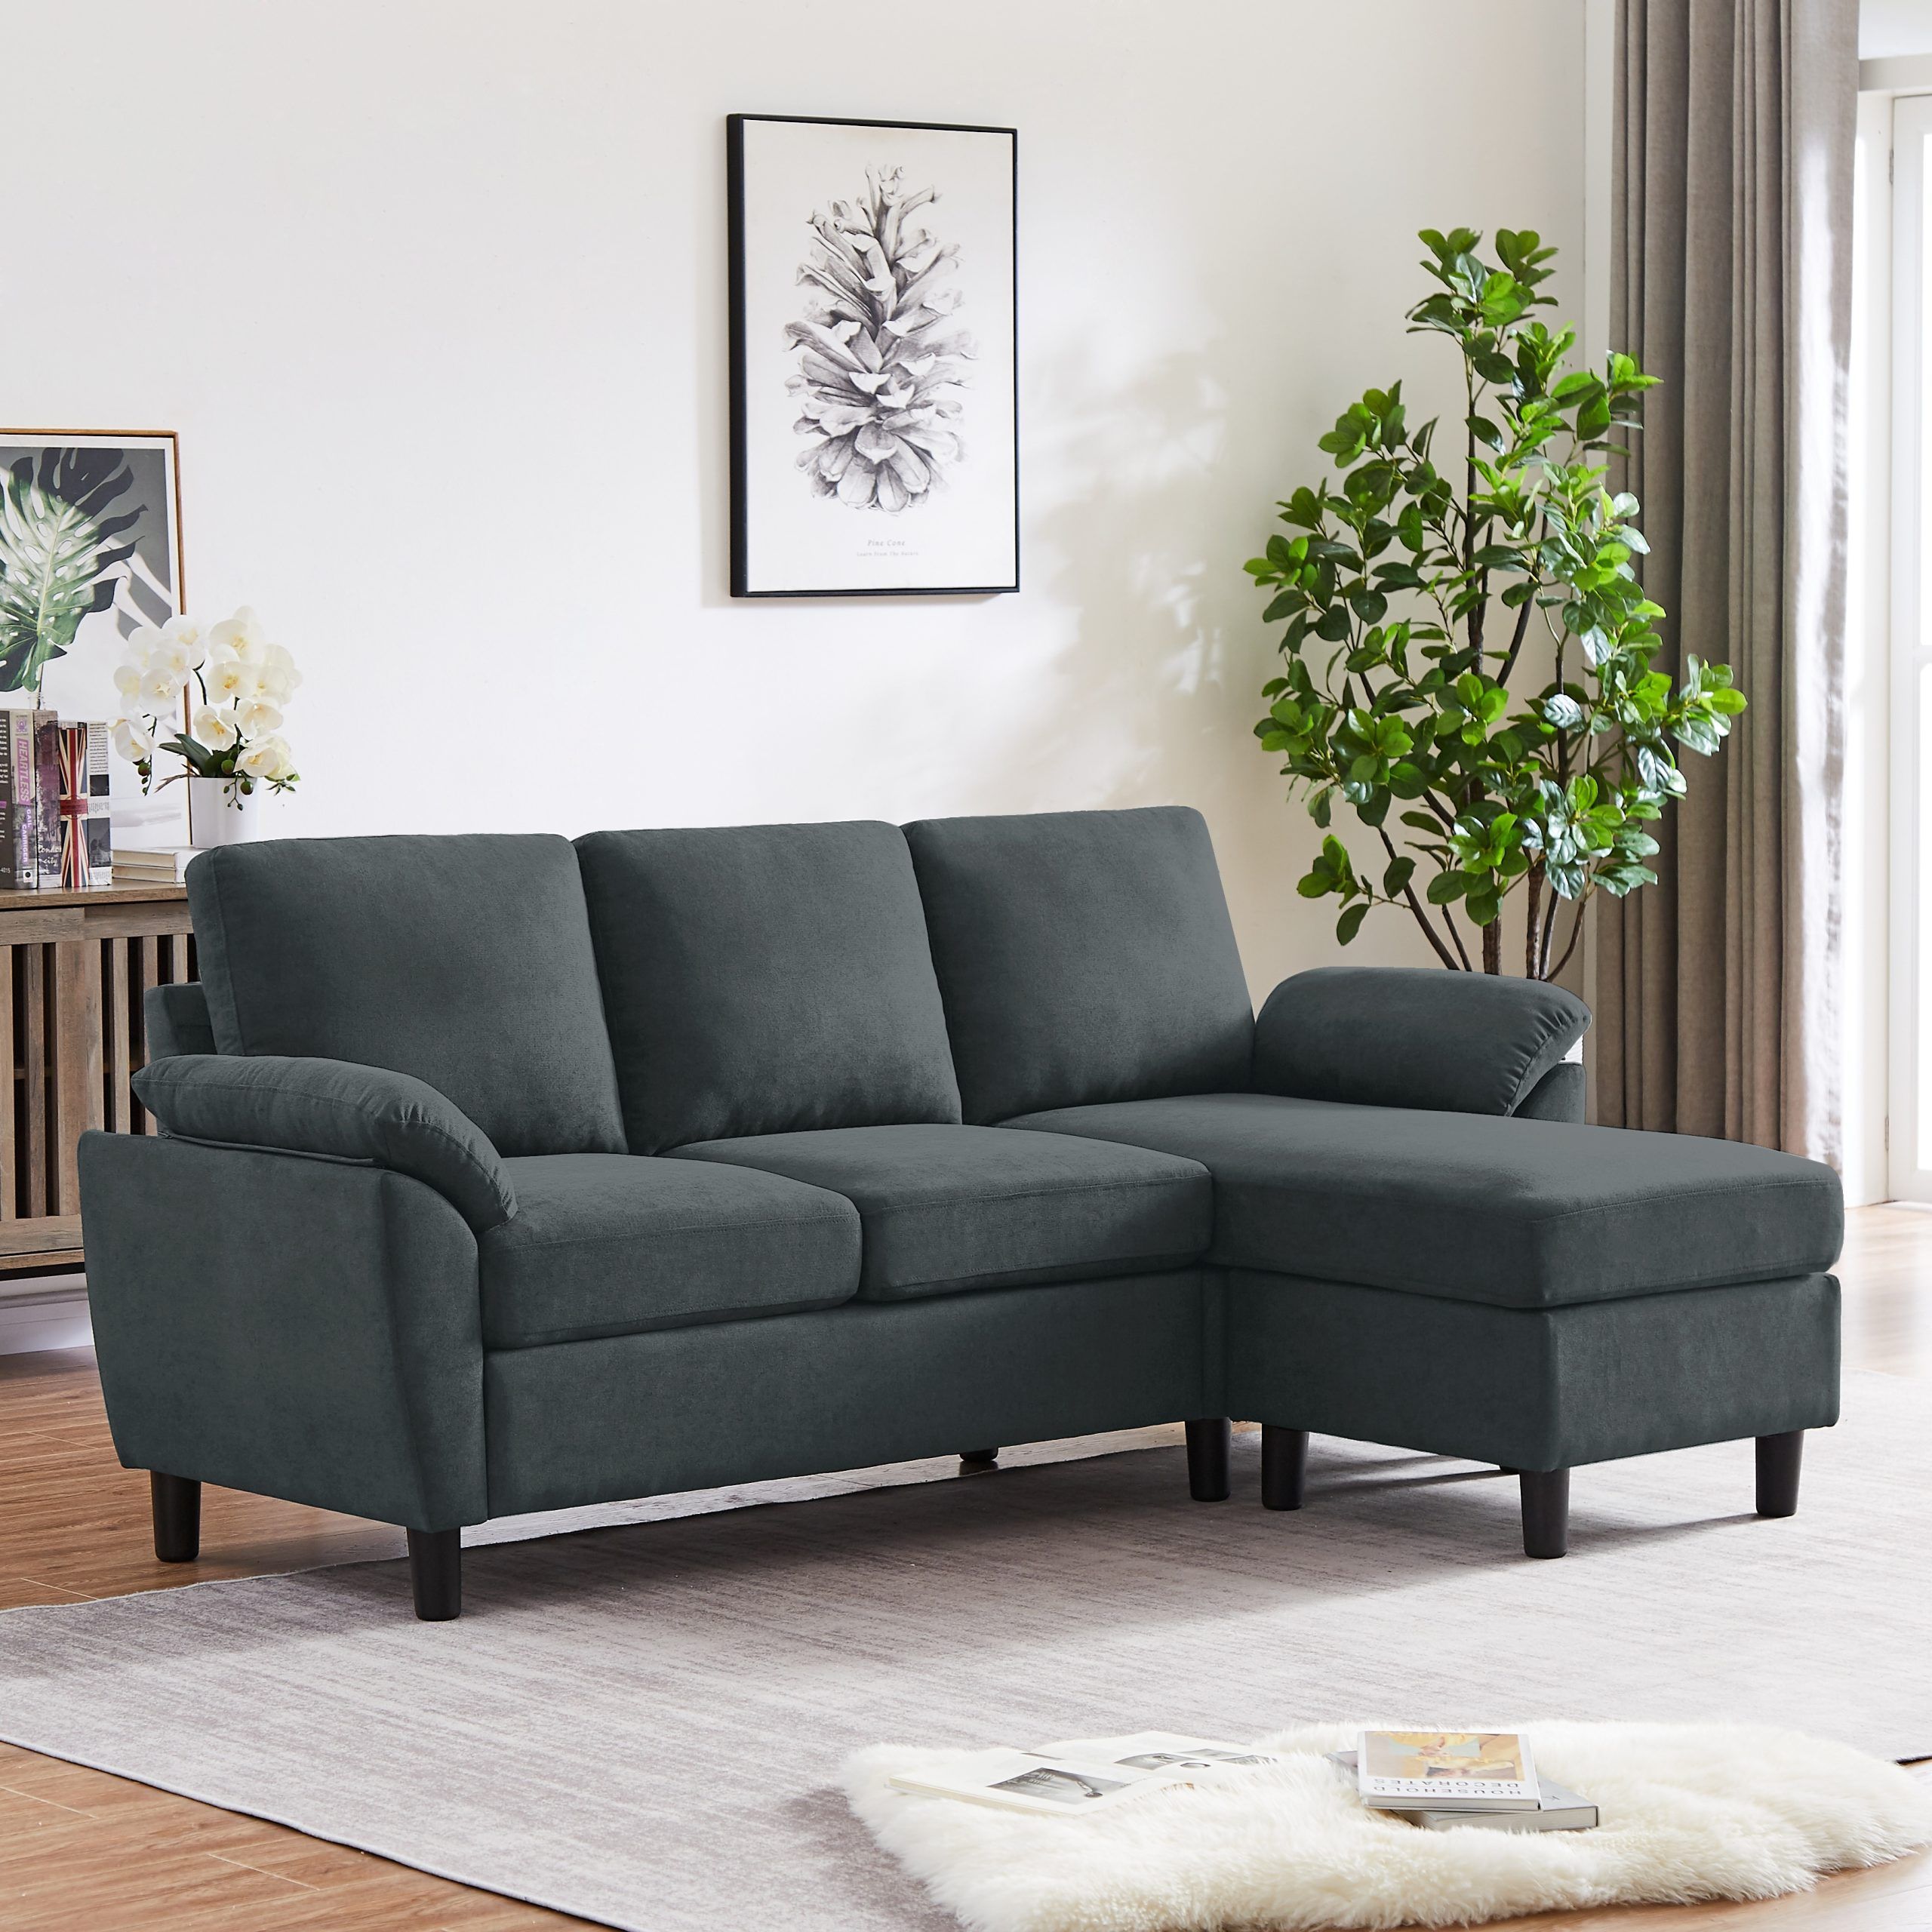 Modern Sectional Sofa Couch L Shaped With Removable Armrest, Convertible  Couch With Reversible Ottoman For Living Room – Bed Bath & Beyond – 36983057 Regarding Convertible L Shaped Sectional Sofas (View 4 of 15)